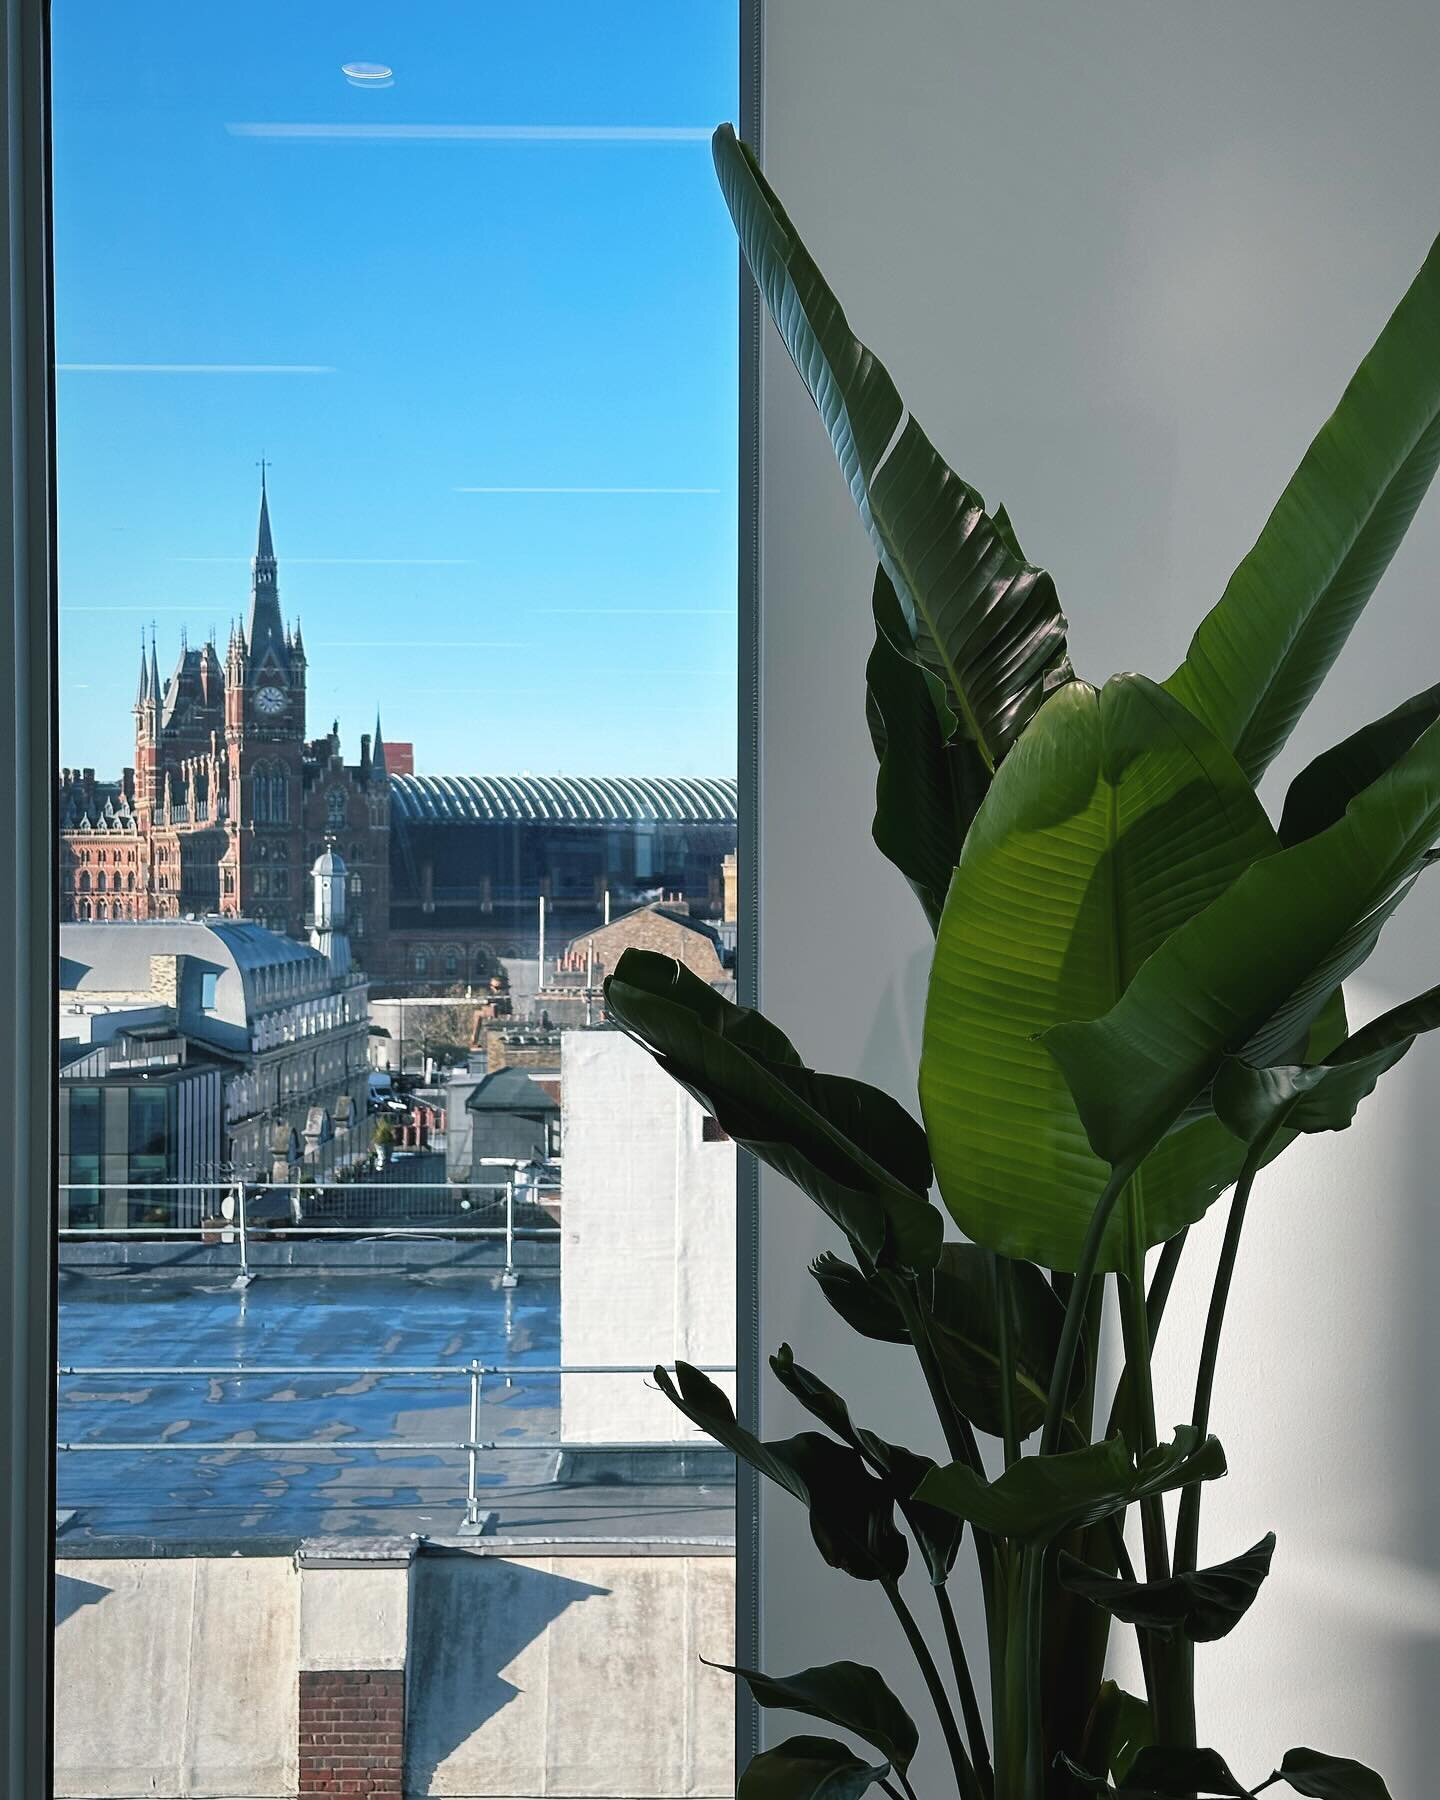 As a team of gardeners we often comment on how we could never work inside, but I have to say we have been installing interior plants in some fabulous offices recently and it&rsquo;s got us all second guessing our preconceptions&hellip;offices are rea